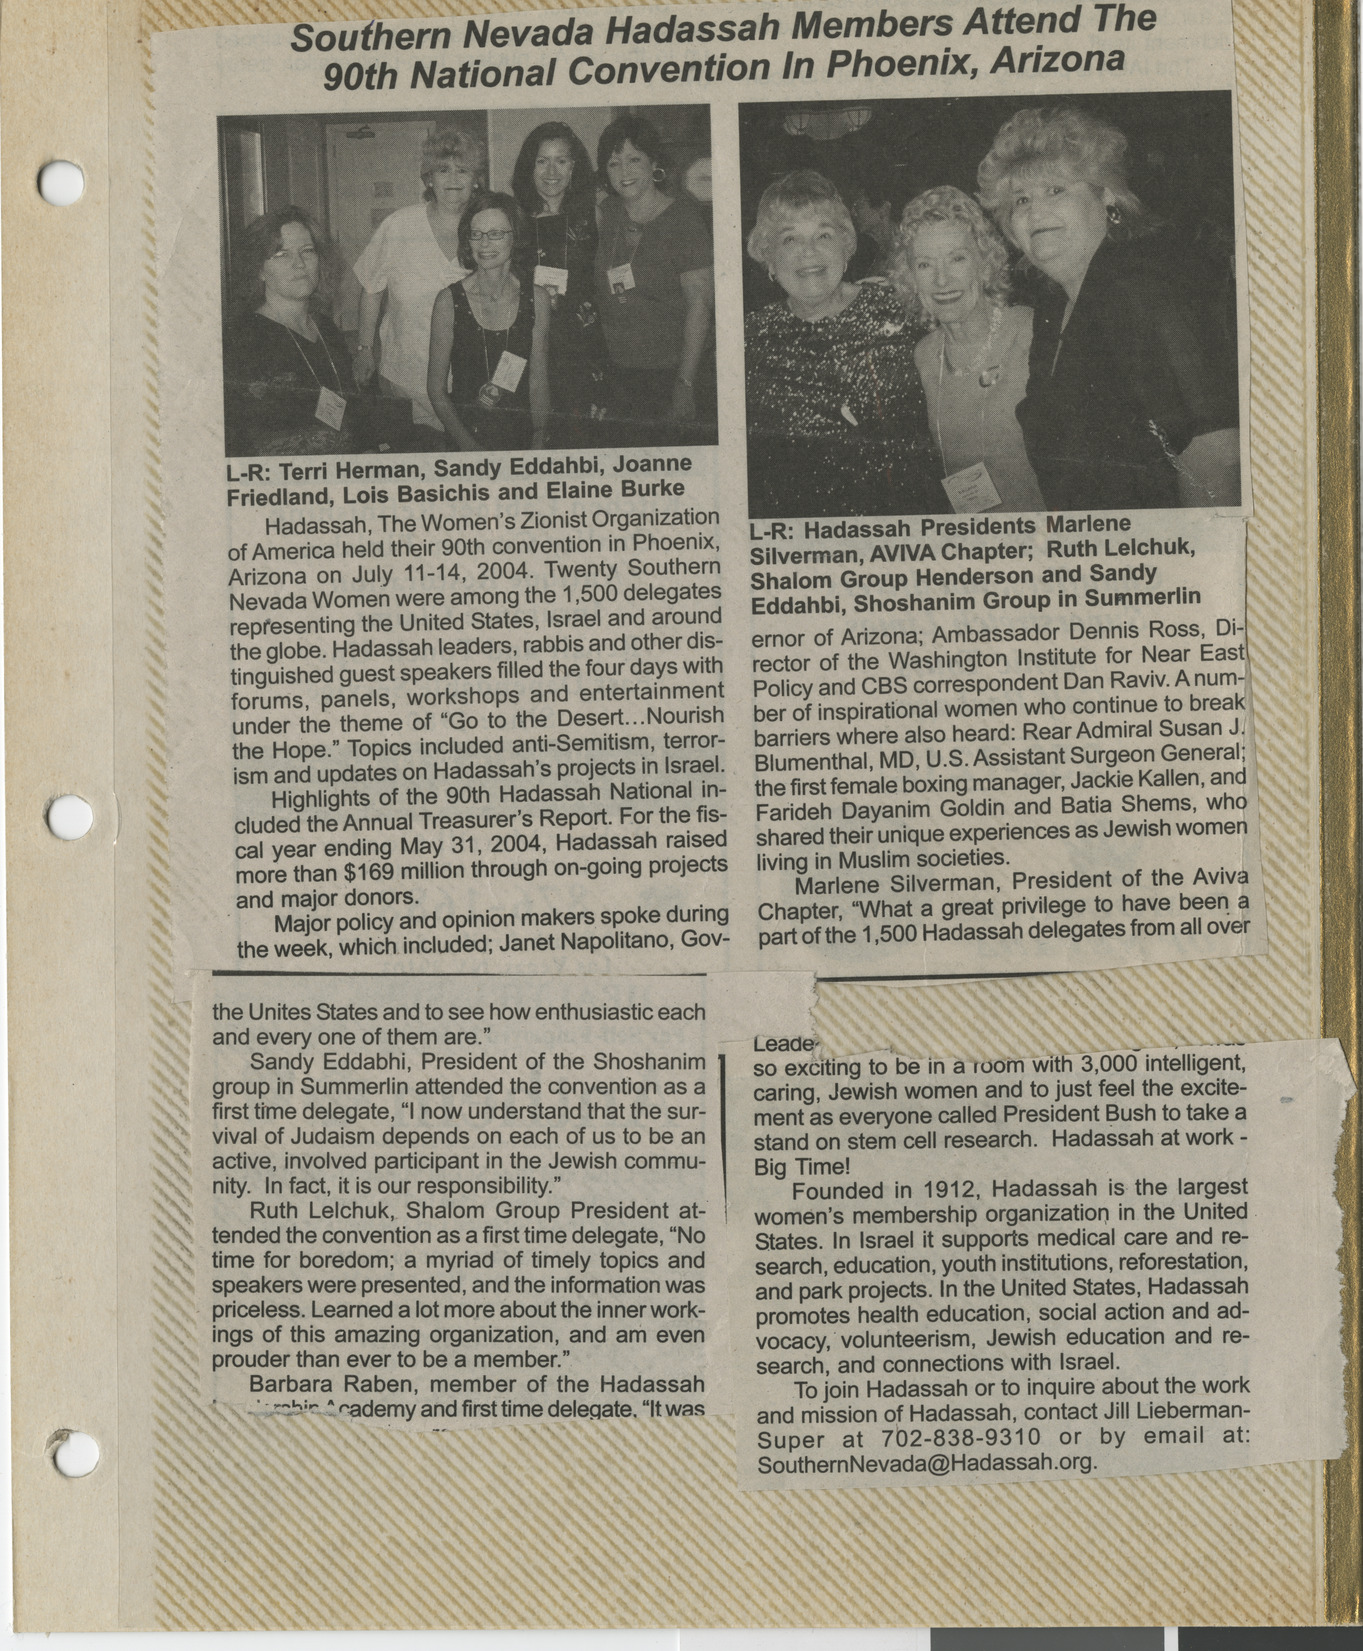 Newspaper clipping, Southern Nevada Hadassah members attend the 90th annual national convention in Phoenix, Arizona, publication and date unknown